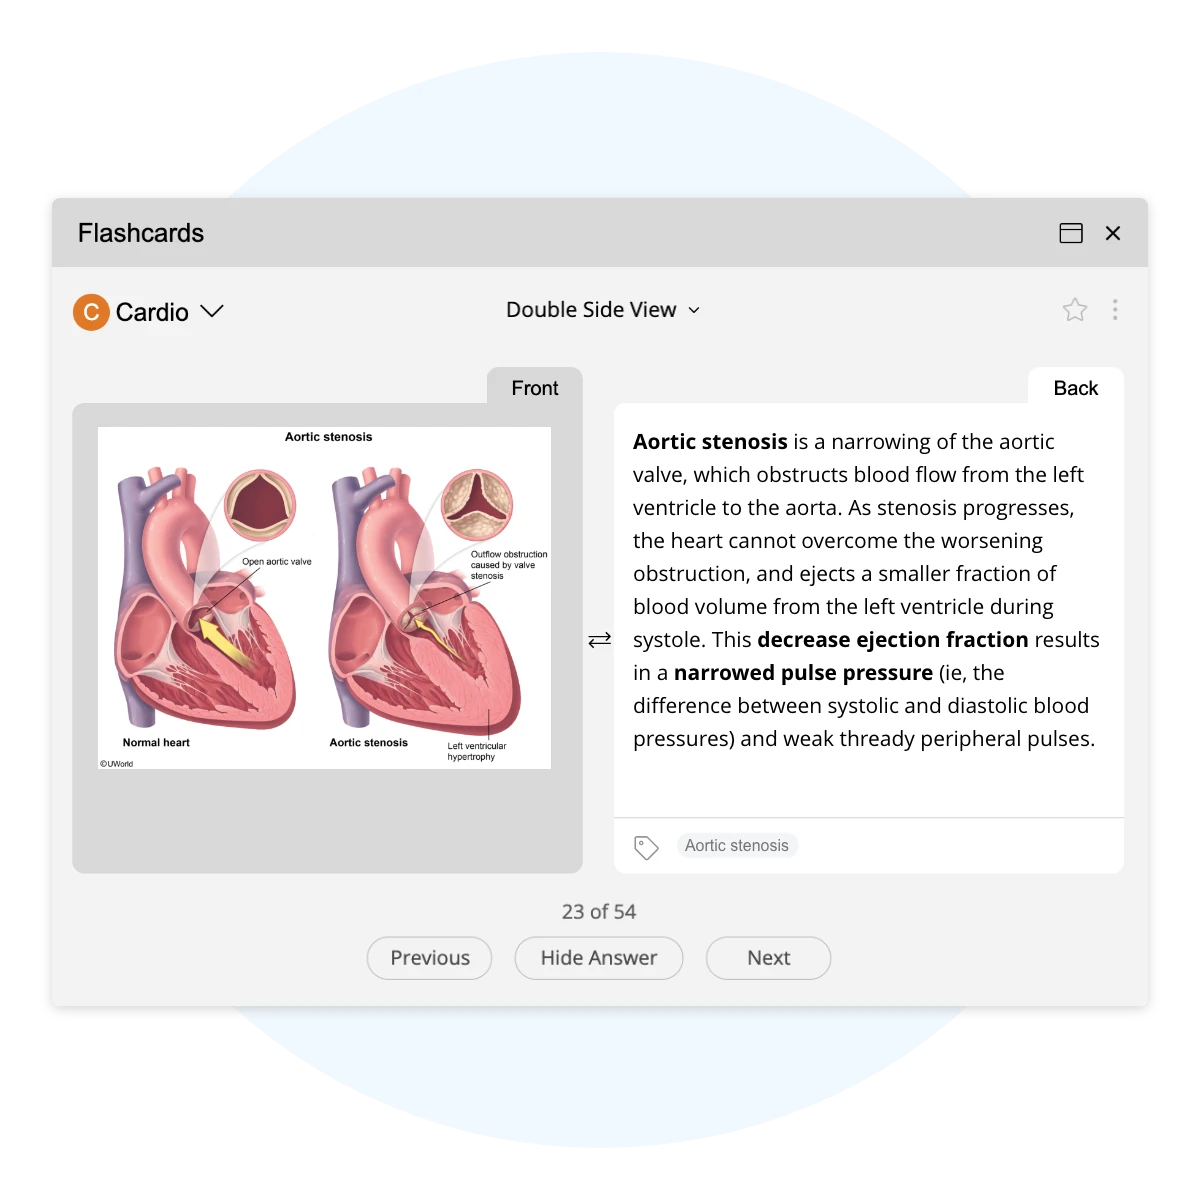 Image of a flashcard from the Self-Study section of UWorld’s Learning Platform for Nursing.